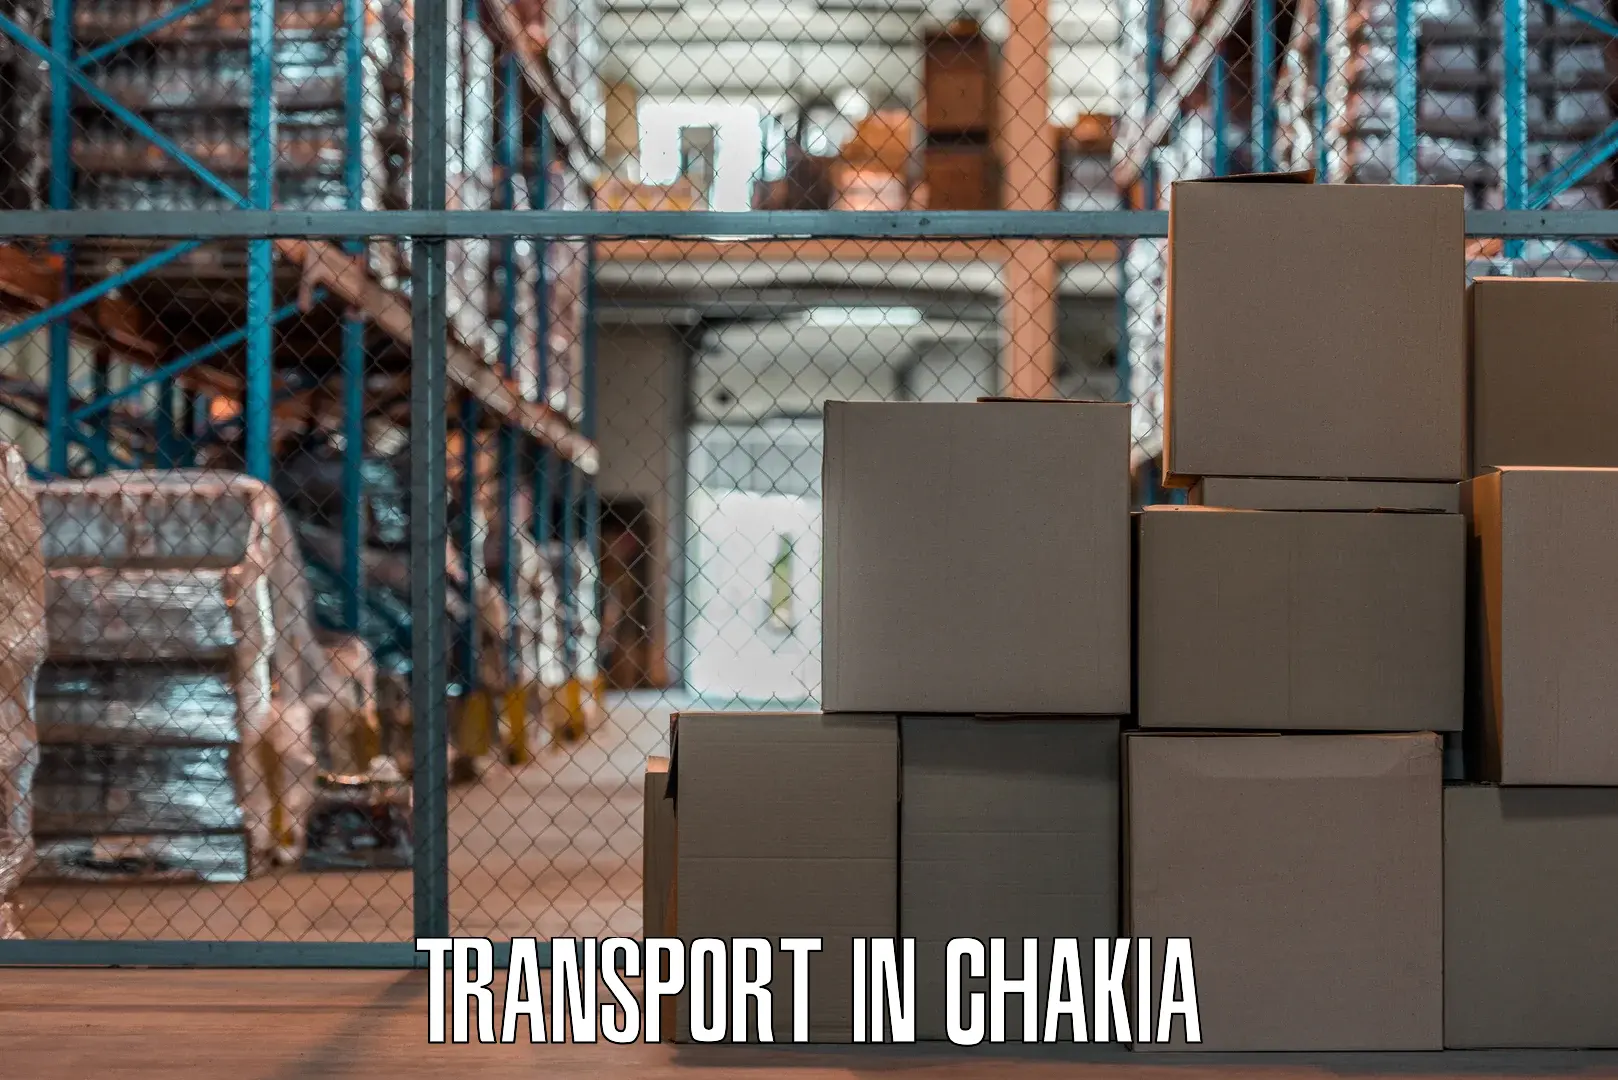 Road transport services in Chakia